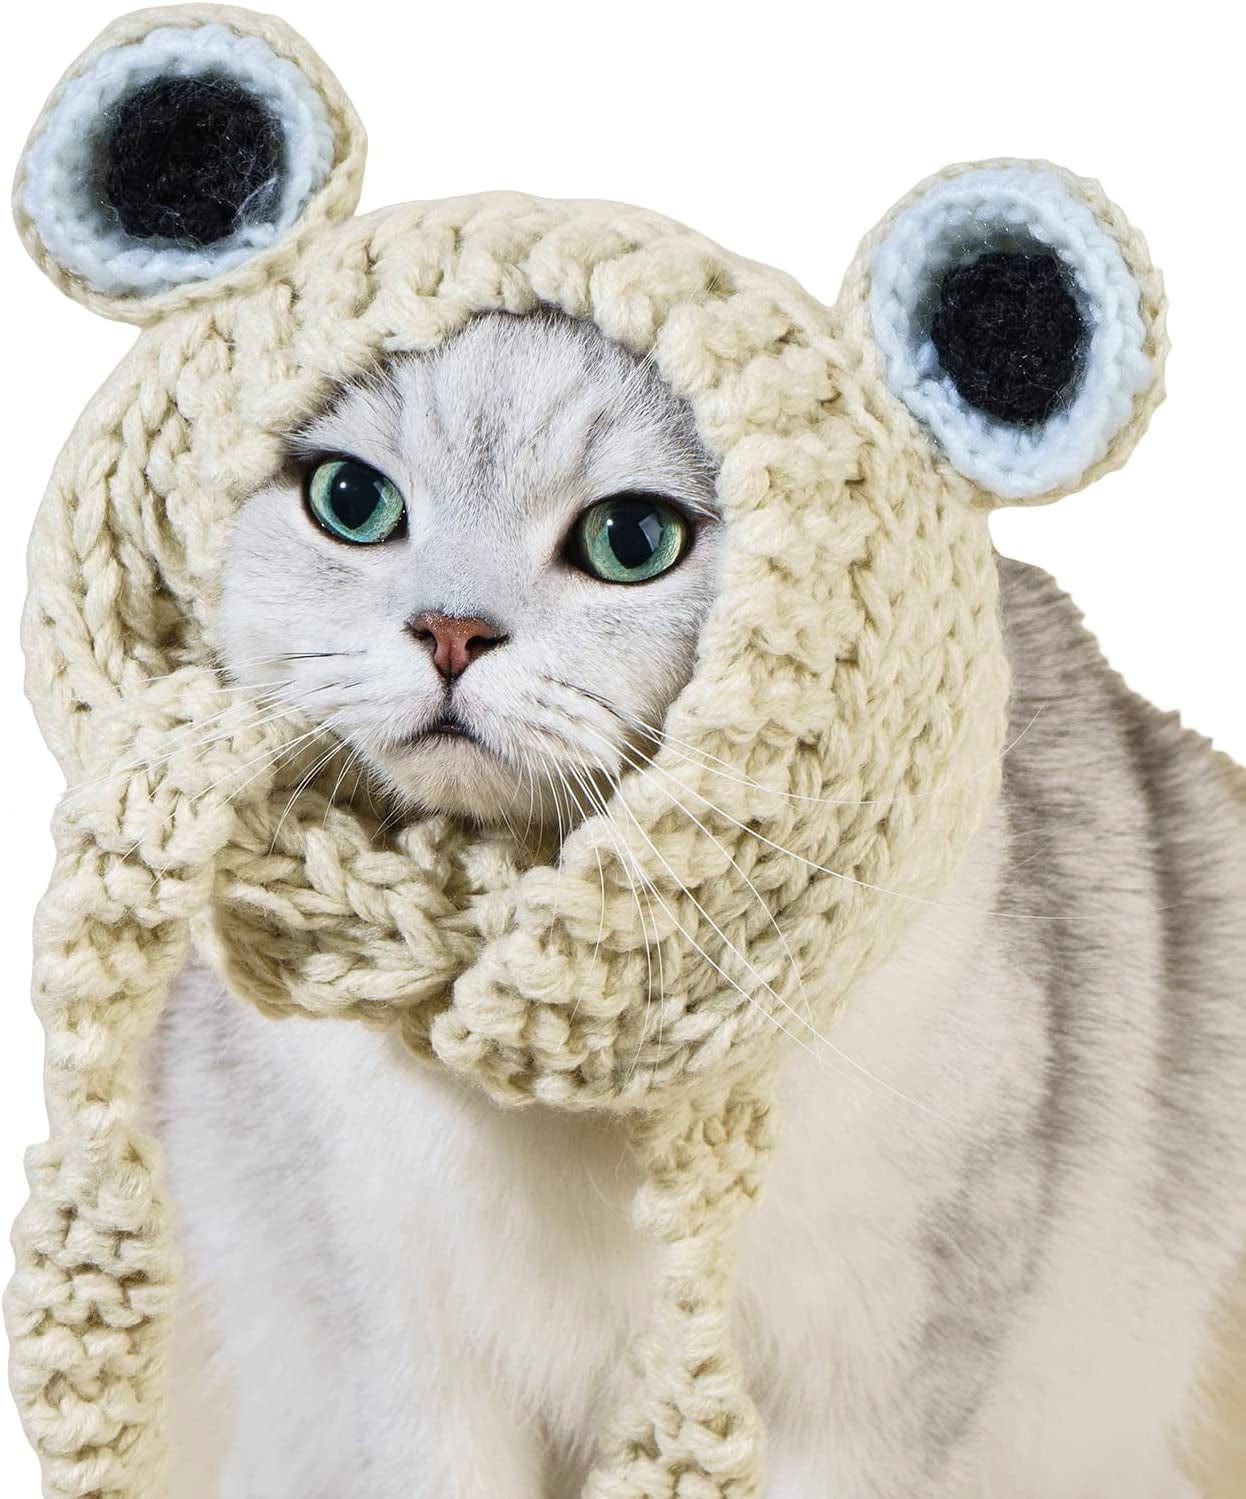 QWINEE Cat Costume Lion Head Frog Funny Mane Cat Hat Halloween Christmas Party Costume Headwear for Puppy Cat Kitten Small Dogs Grey S